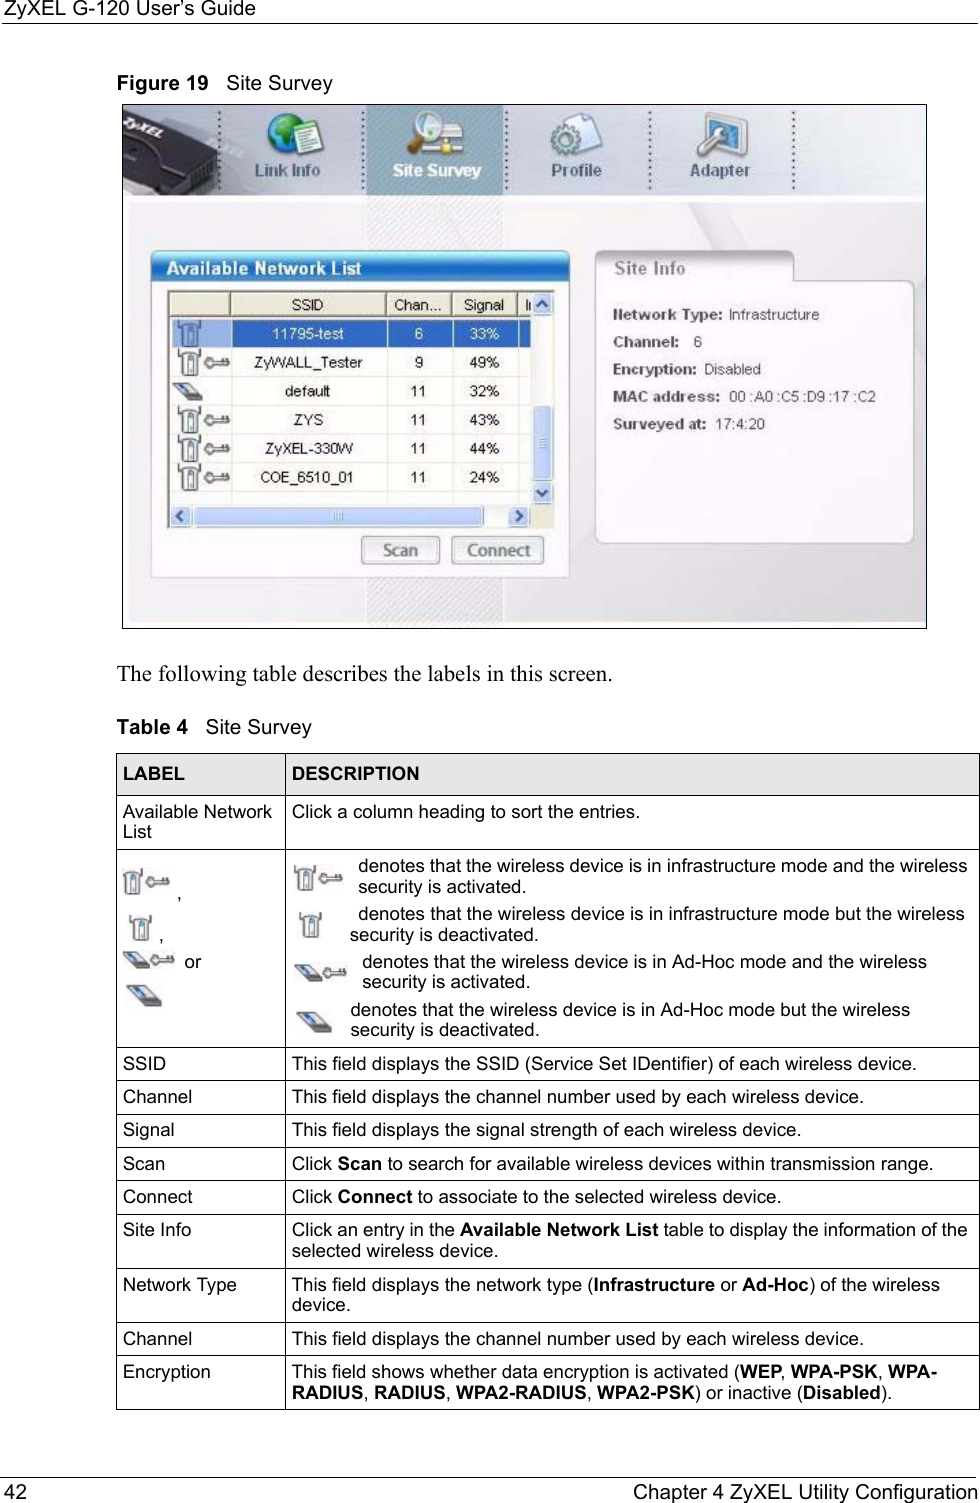 ZyXEL G-120 User’s Guide42 Chapter 4 ZyXEL Utility ConfigurationFigure 19   Site Survey The following table describes the labels in this screen. Table 4   Site Survey LABEL DESCRIPTIONAvailable Network ListClick a column heading to sort the entries.,, ordenotes that the wireless device is in infrastructure mode and the wireless security is activated.denotes that the wireless device is in infrastructure mode but the wireless security is deactivated.denotes that the wireless device is in Ad-Hoc mode and the wireless security is activated.denotes that the wireless device is in Ad-Hoc mode but the wireless security is deactivated.SSID This field displays the SSID (Service Set IDentifier) of each wireless device.Channel This field displays the channel number used by each wireless device.Signal This field displays the signal strength of each wireless device.Scan Click Scan to search for available wireless devices within transmission range.Connect Click Connect to associate to the selected wireless device.Site Info Click an entry in the Available Network List table to display the information of the selected wireless device.Network Type  This field displays the network type (Infrastructure or Ad-Hoc) of the wireless device.Channel This field displays the channel number used by each wireless device.Encryption This field shows whether data encryption is activated (WEP, WPA-PSK, WPA-RADIUS, RADIUS, WPA2-RADIUS, WPA2-PSK) or inactive (Disabled).